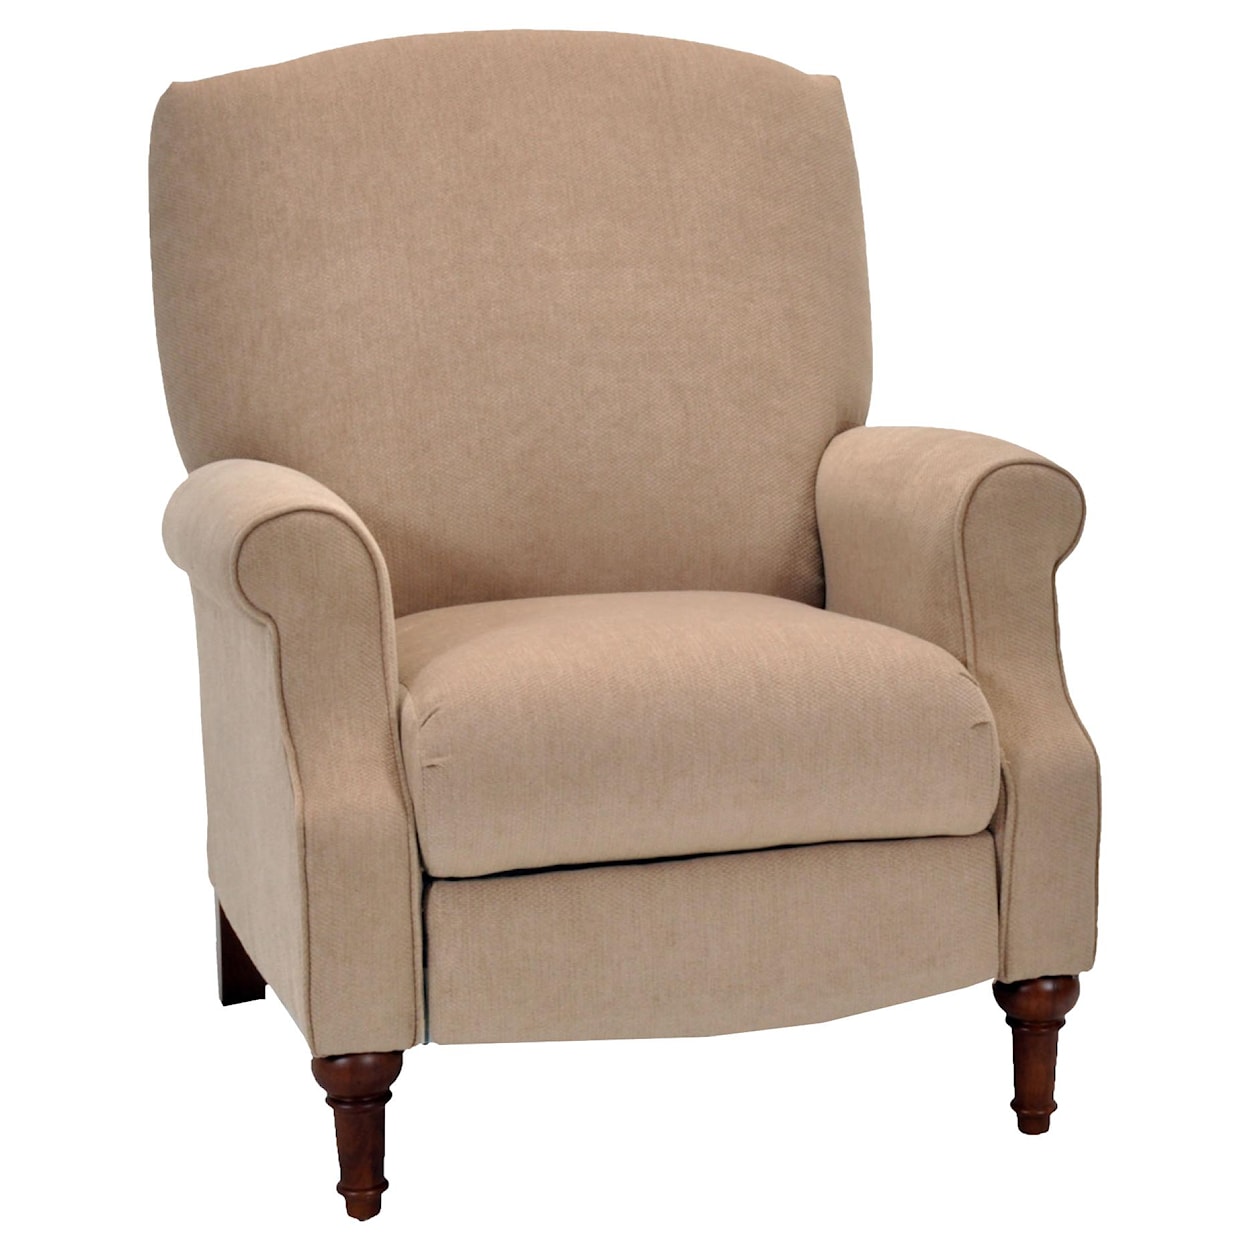 Franklin High and Low Leg Recliners  Kate Traditional Recliner